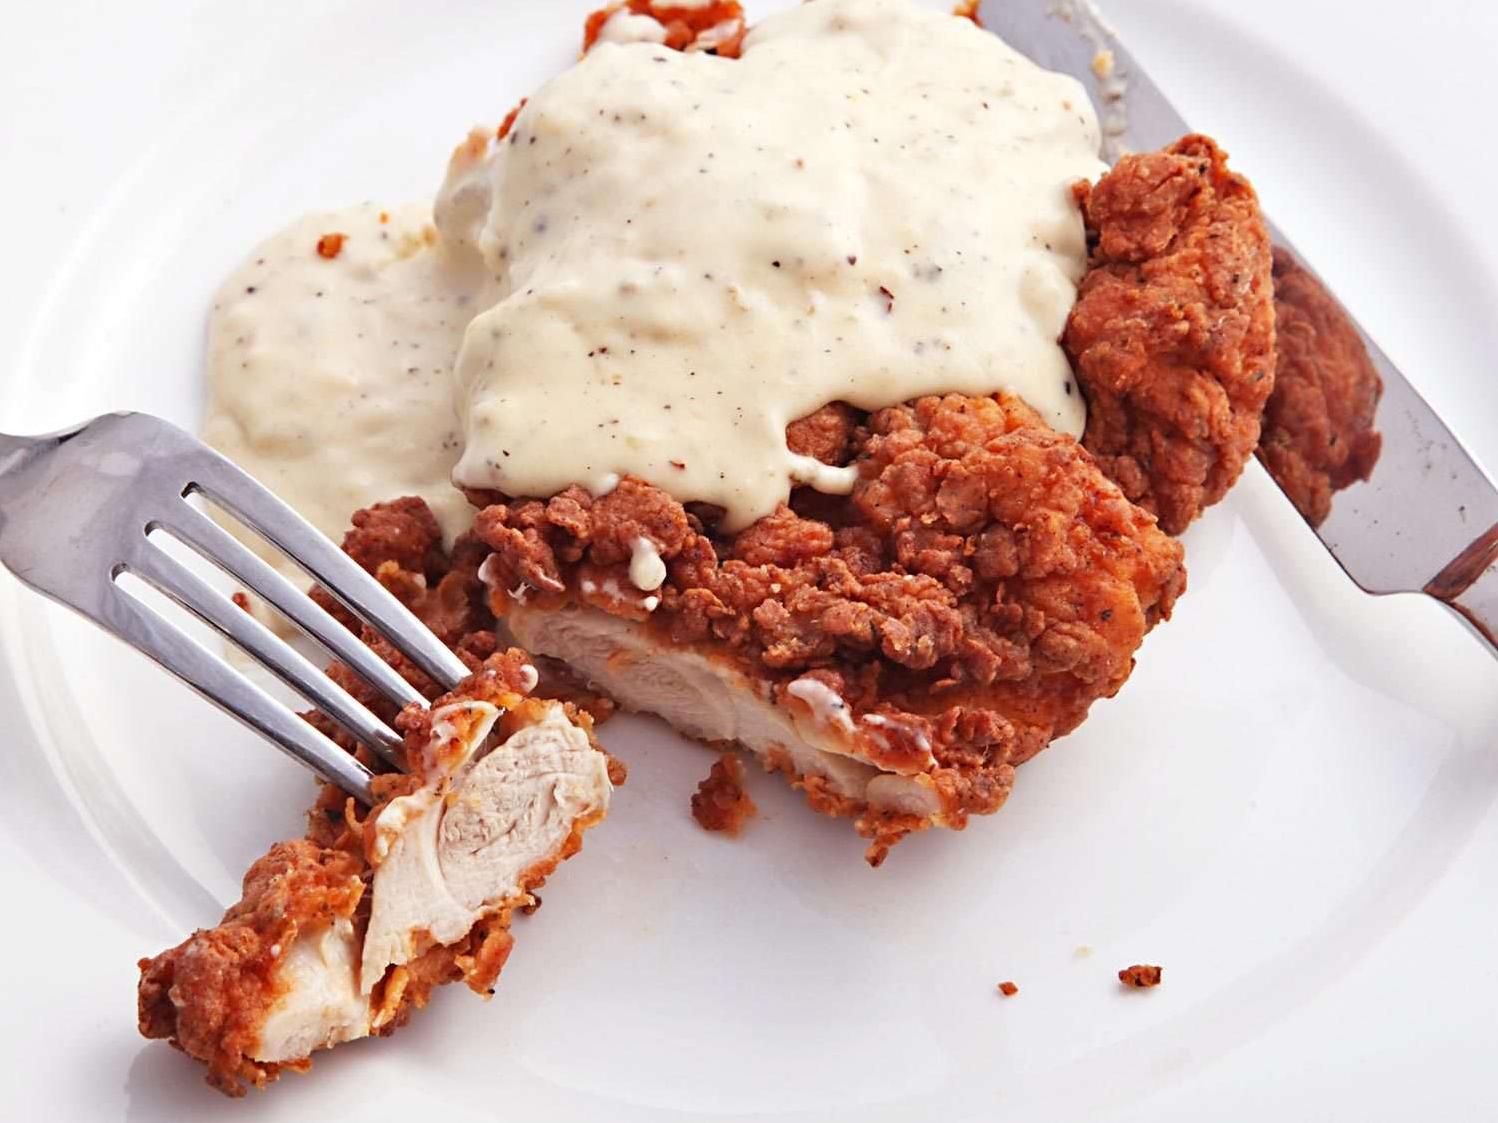  Biscuits and gravy have met their match with this chicken and gravy combo.